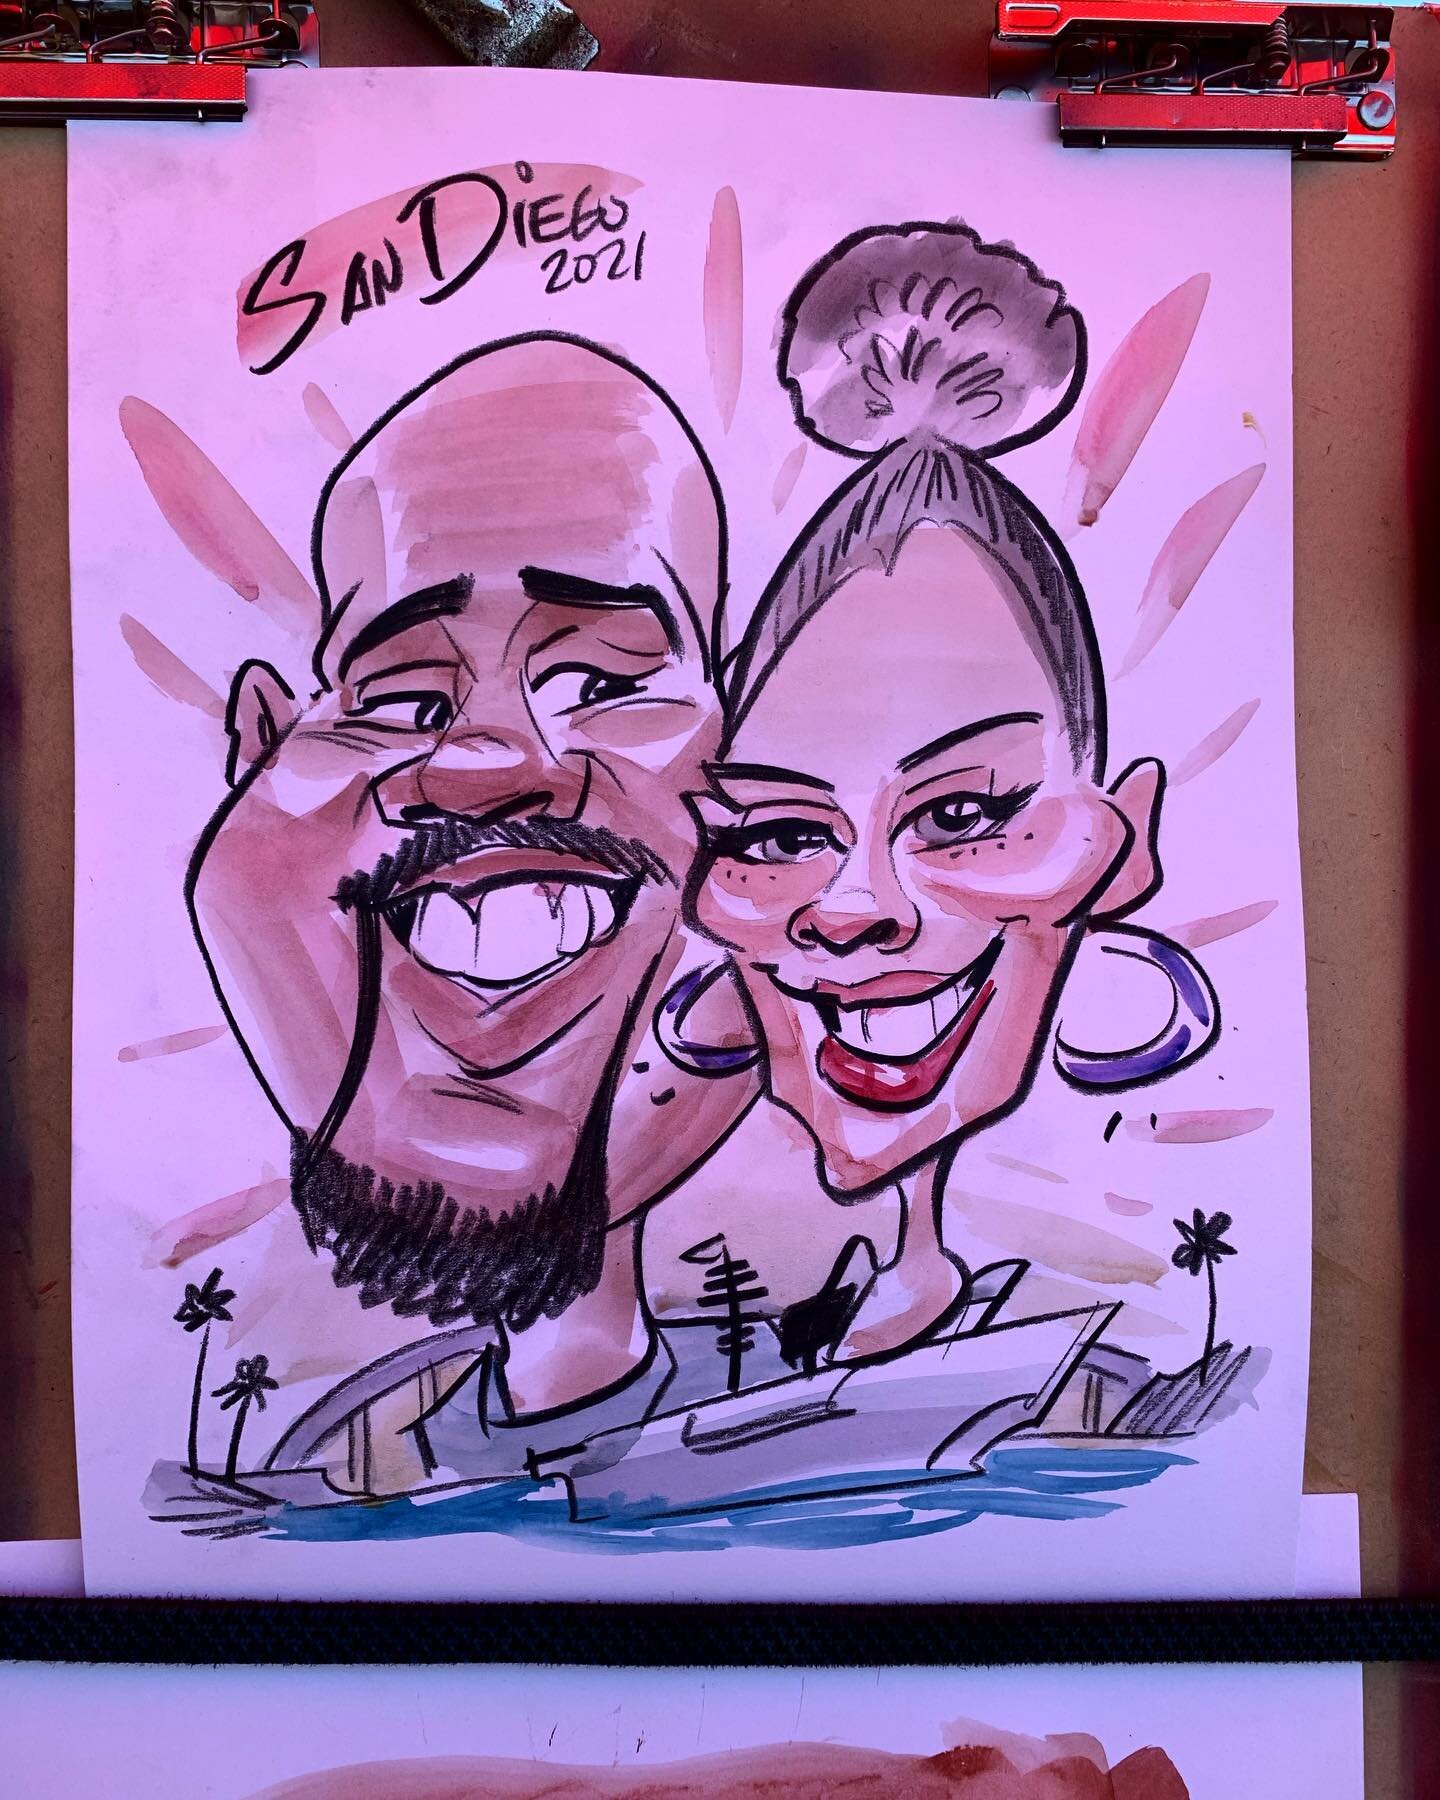 Afriendly watercolor caricature...4 out of 10 on the exaggeration scale...

#livedrawing #caricatures #watercolors #quicksketches #weekendfuntime #souvenirideas #touristythings #buskinglife #goofydrawing #memories @ussmidwaymuseum #sandiegofun